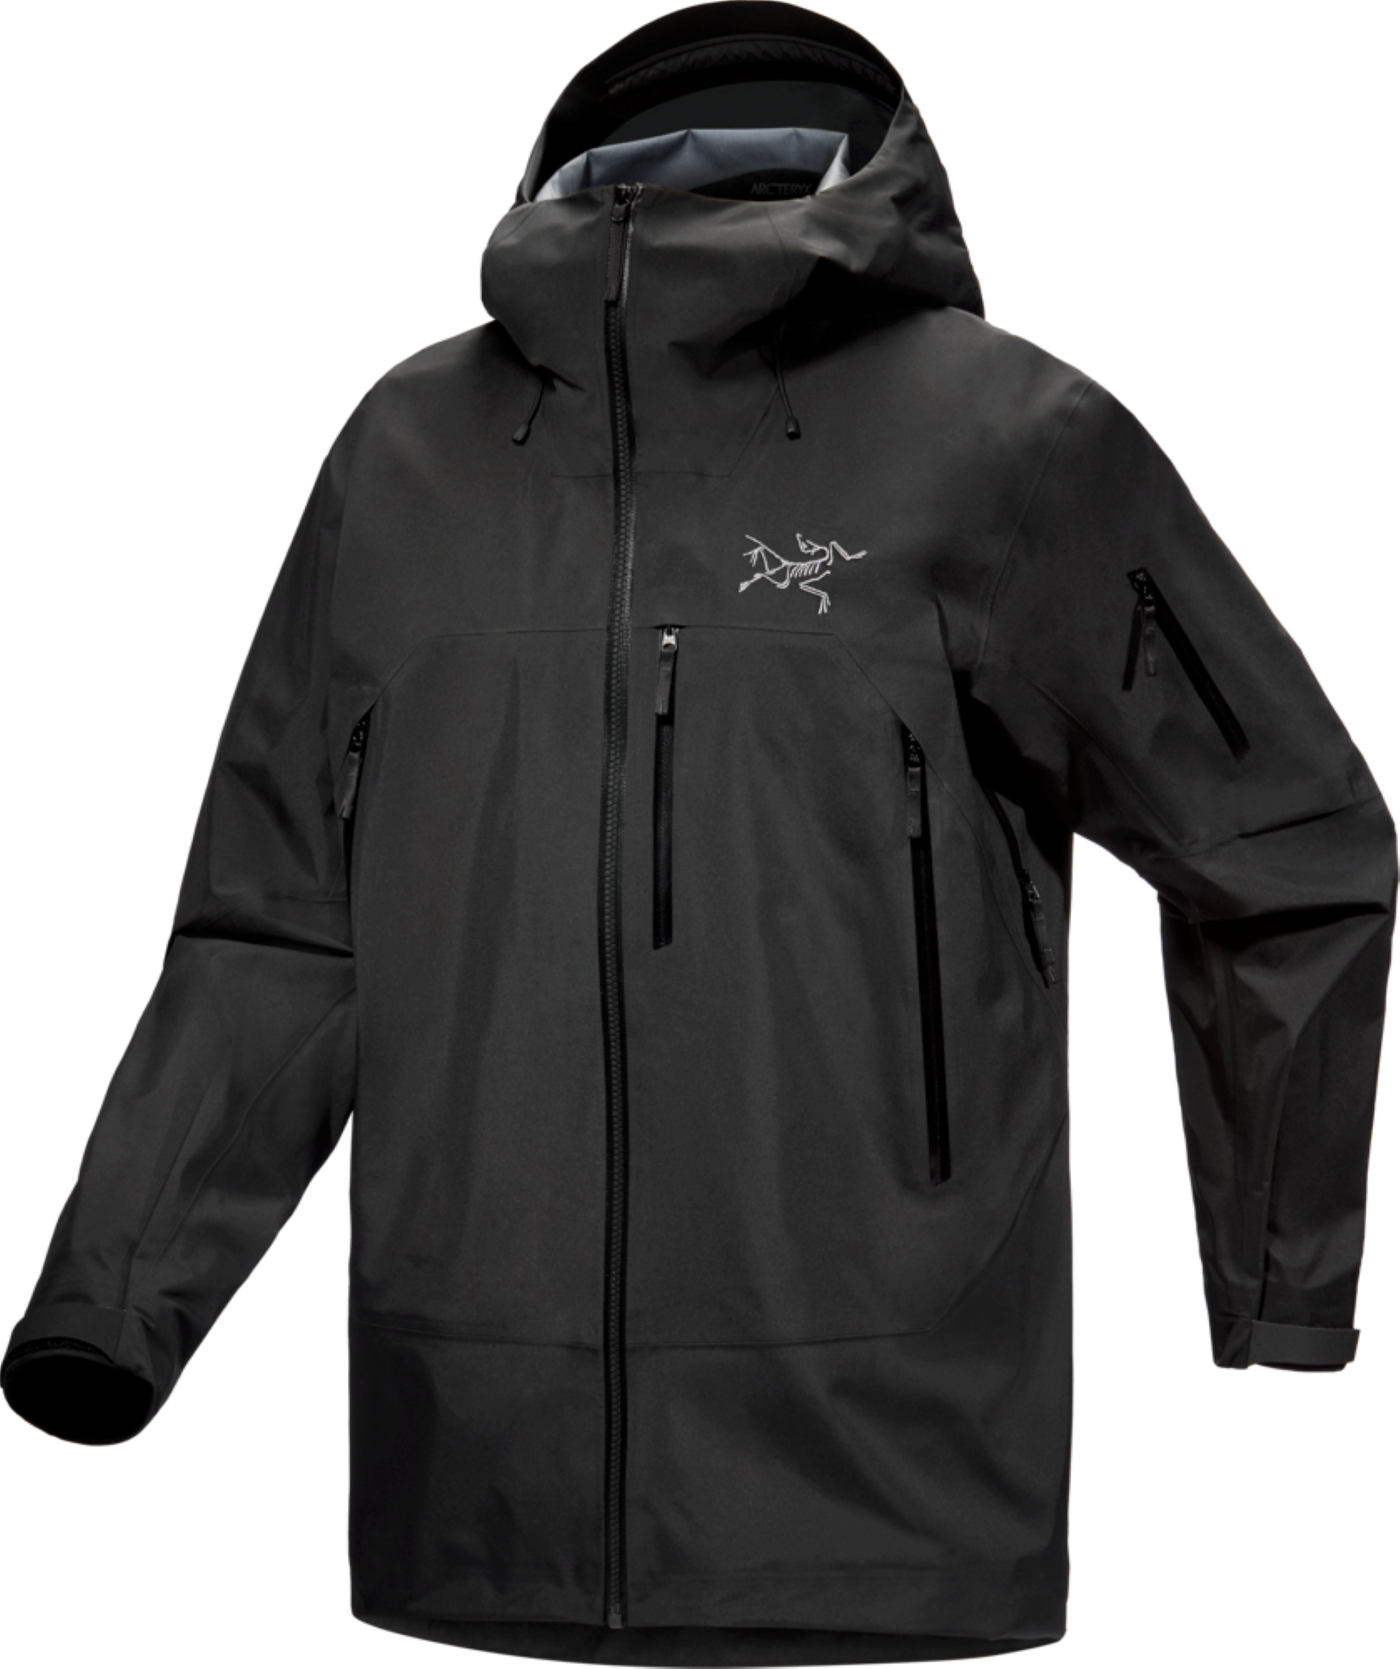 Arc'teryx Rush Insulated Jacket Men's from Hilton's Tent City in Cambridge,  MA